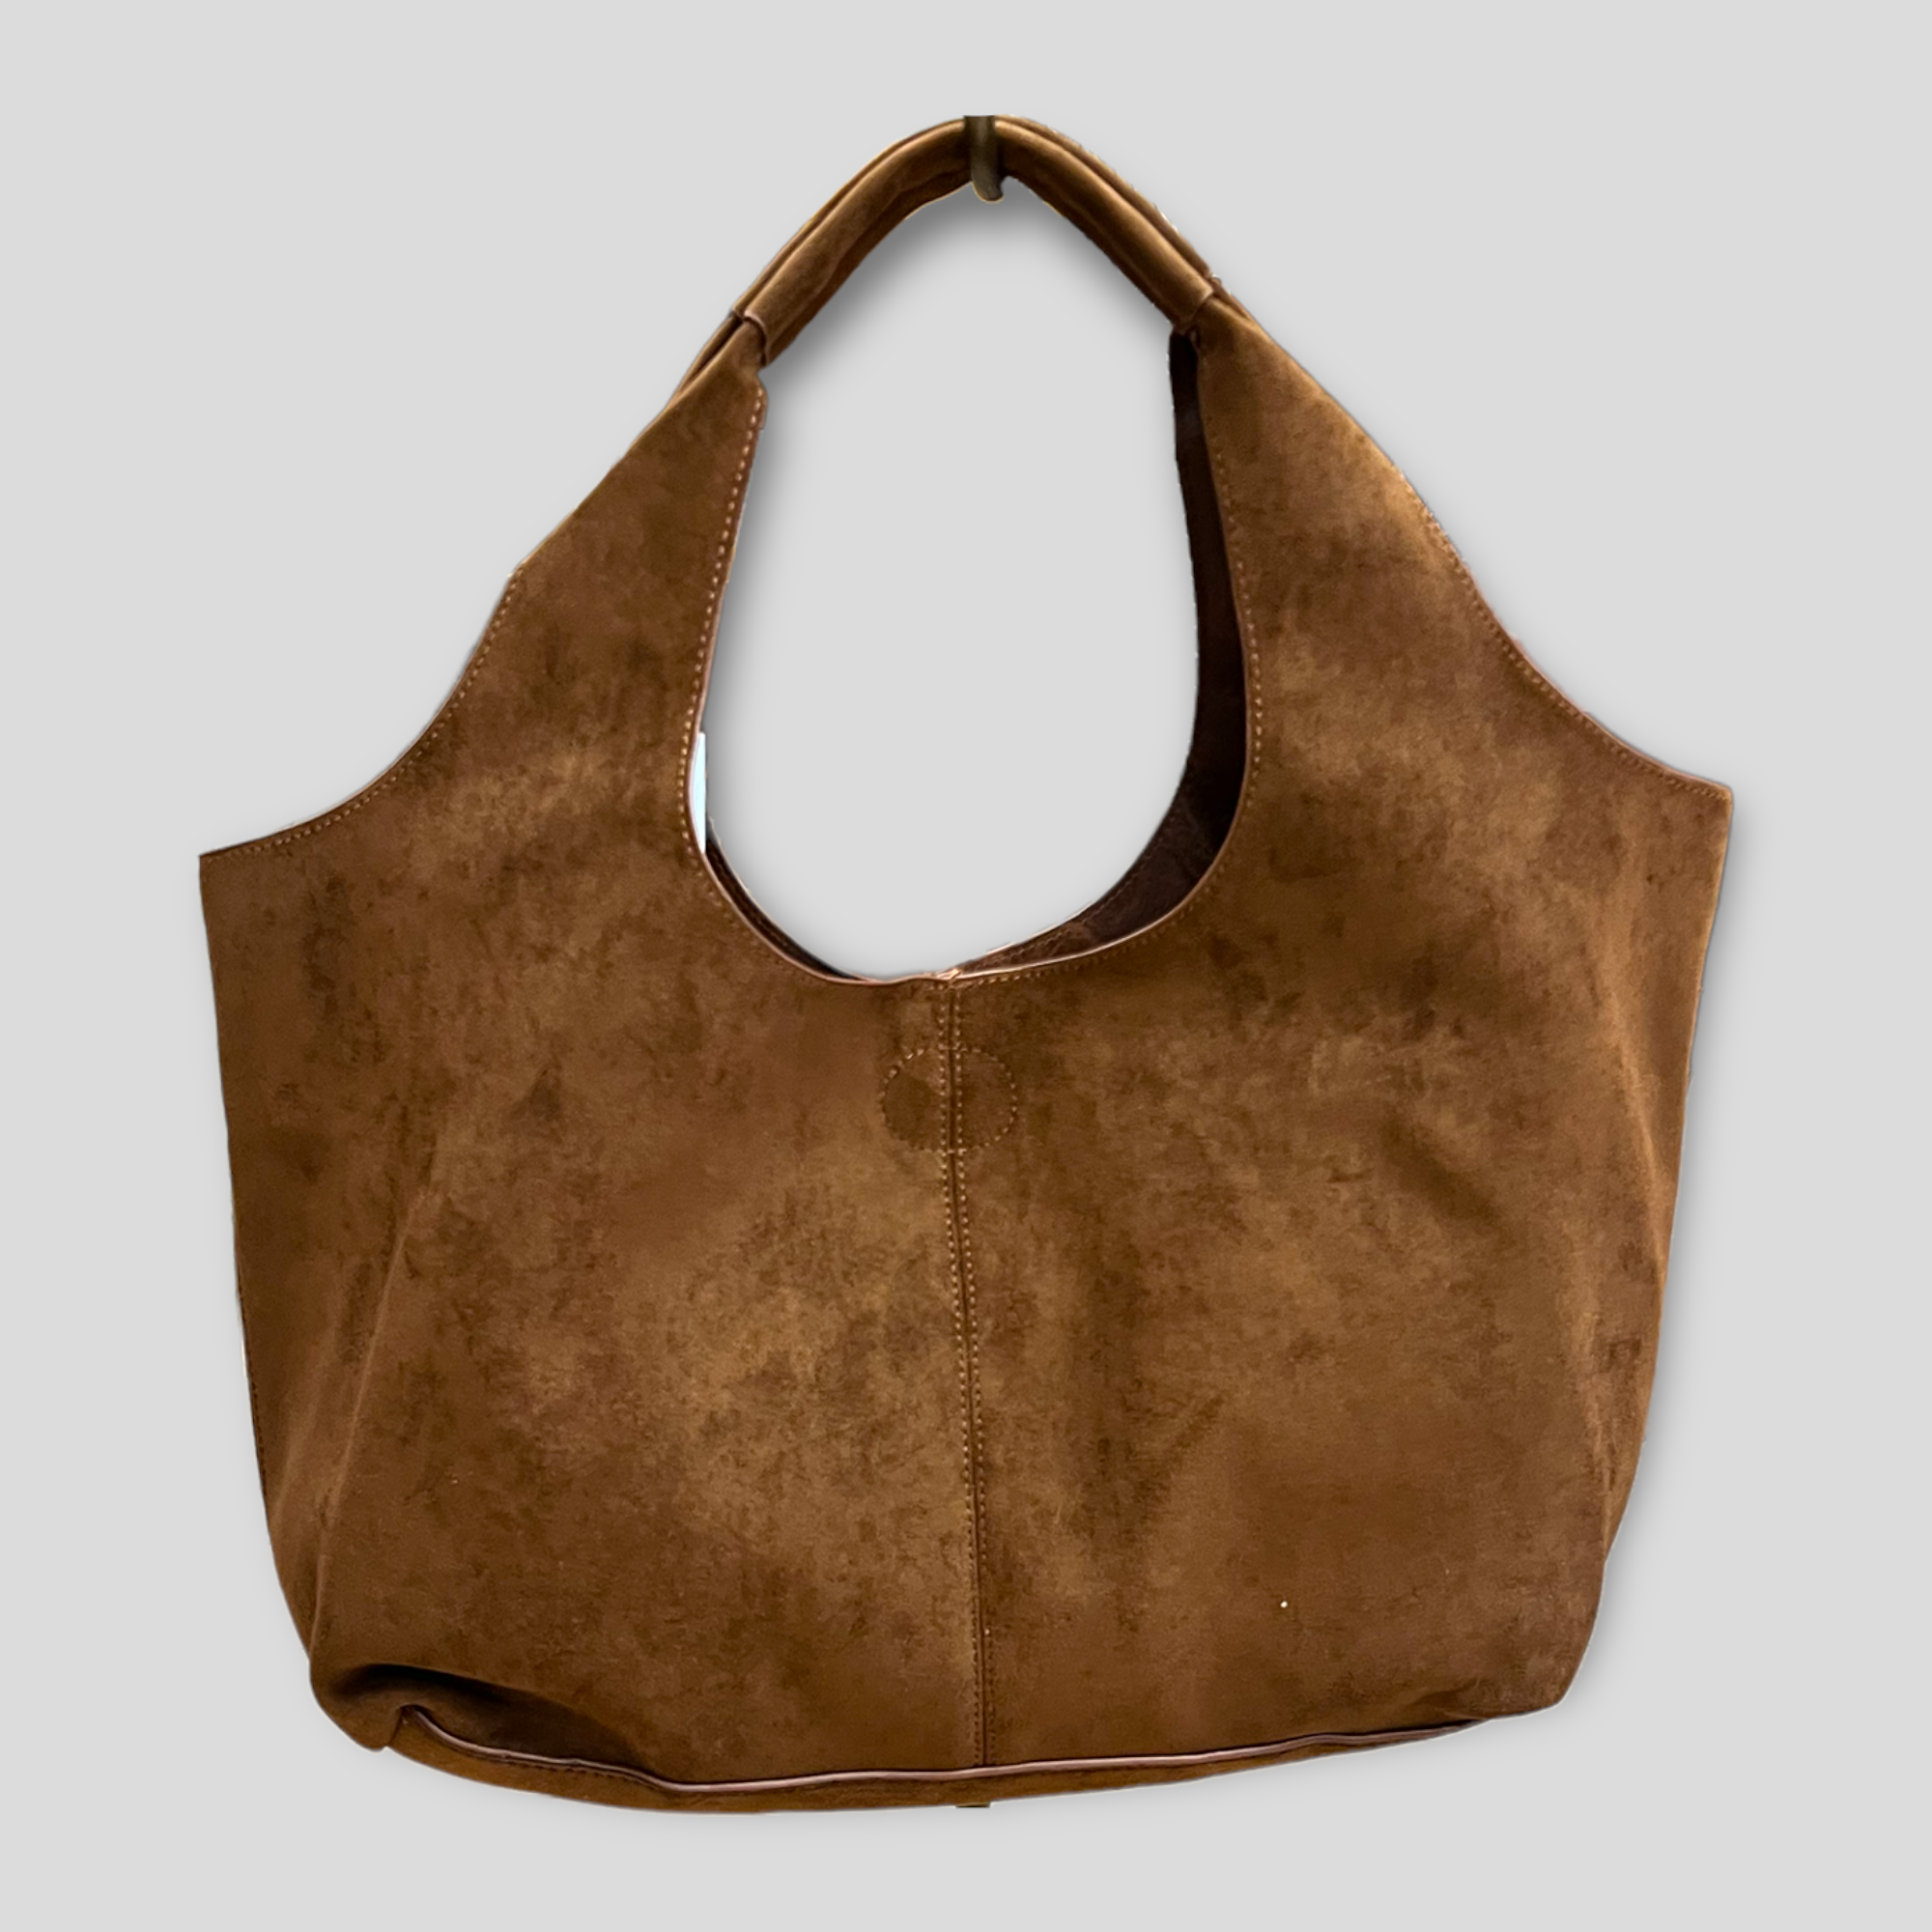 Minimalist Hobo Bag With Inner Pouch